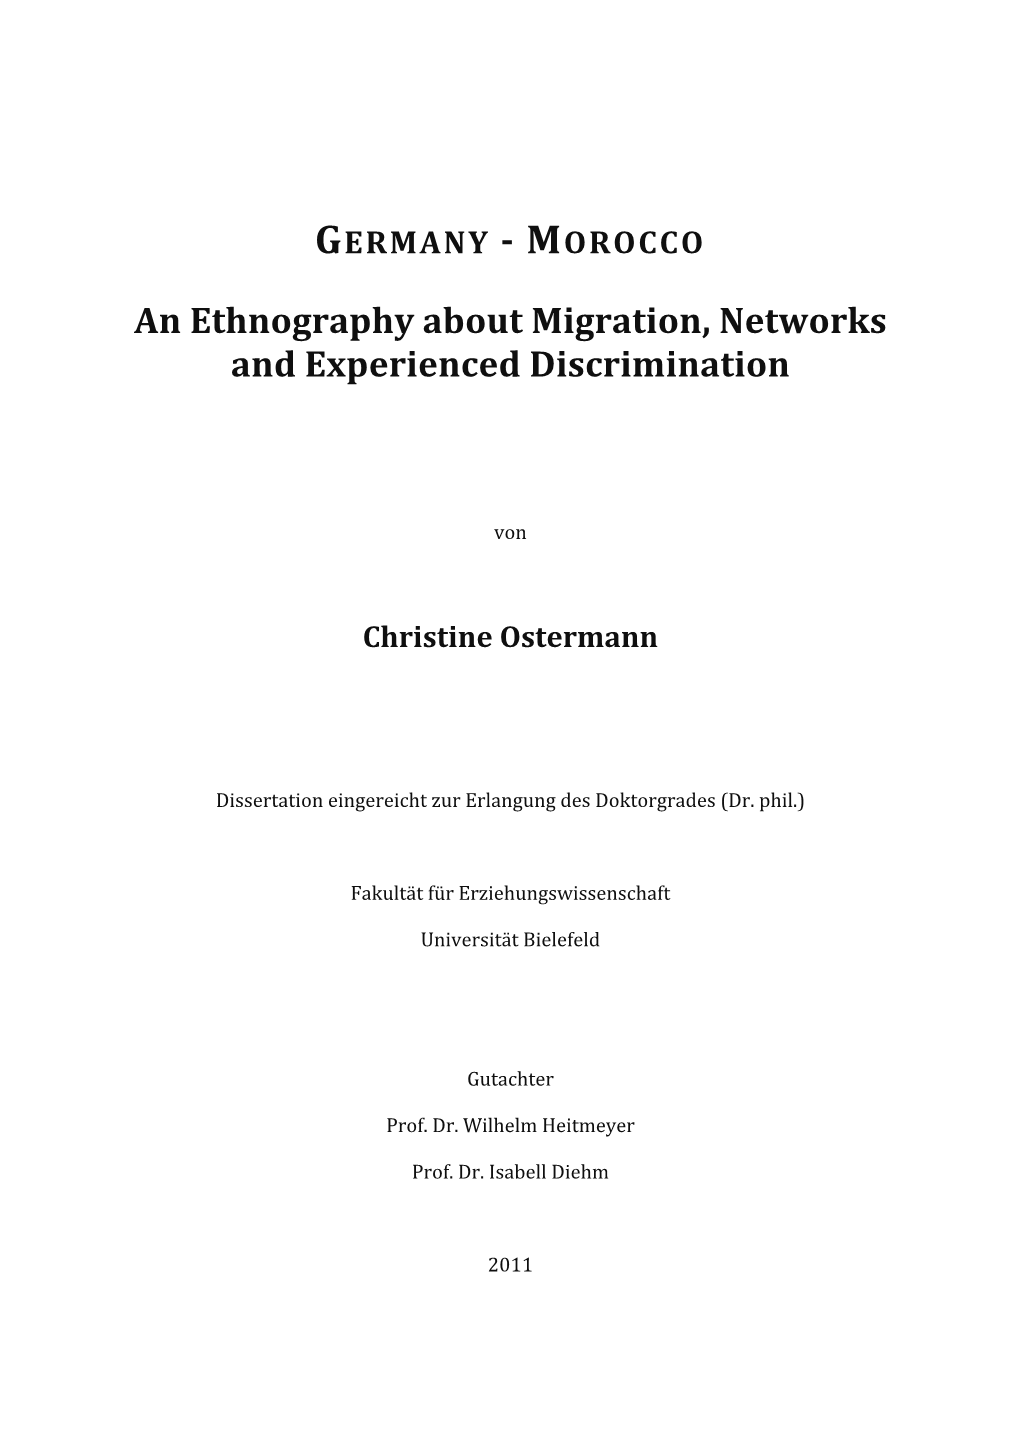 An Ethnography About Migration, Networks and Experienced Discrimination